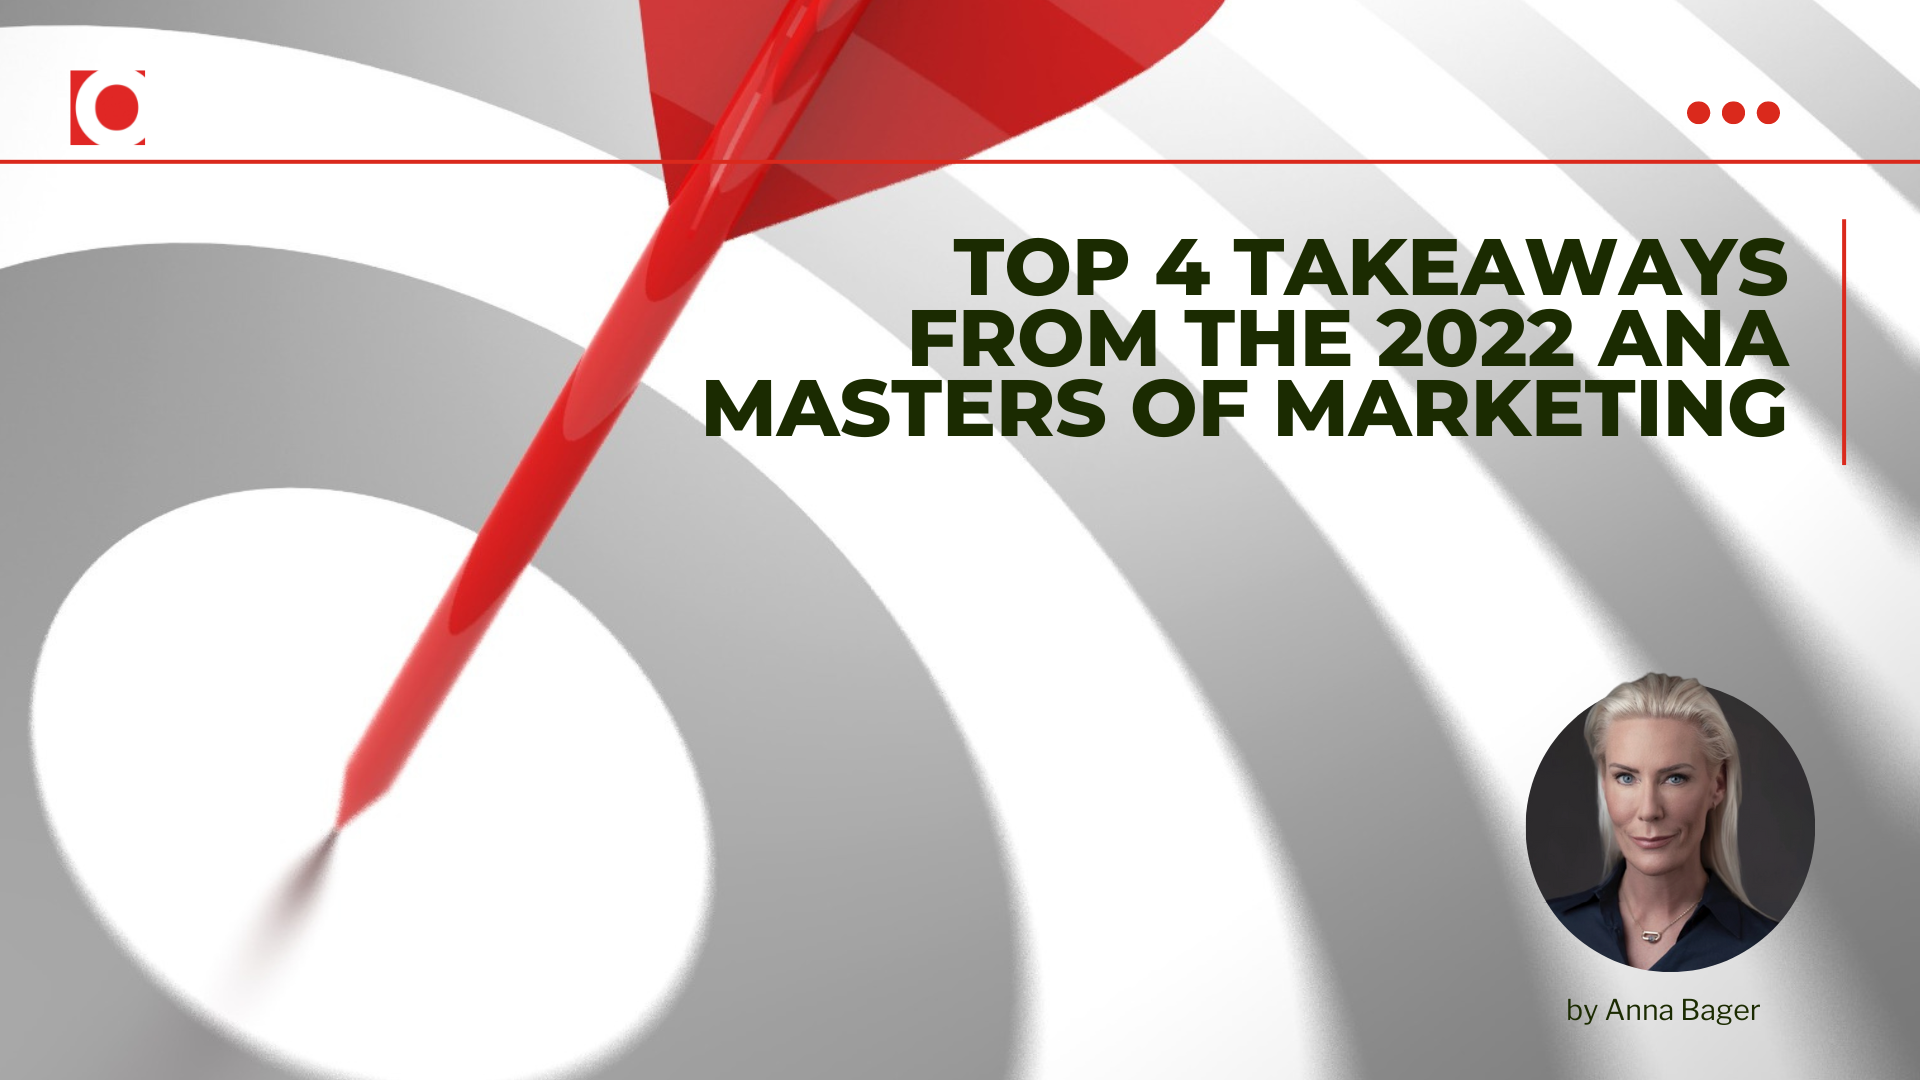 My Top 4 Takeaways from the 2022 ANA Masters of Marketing